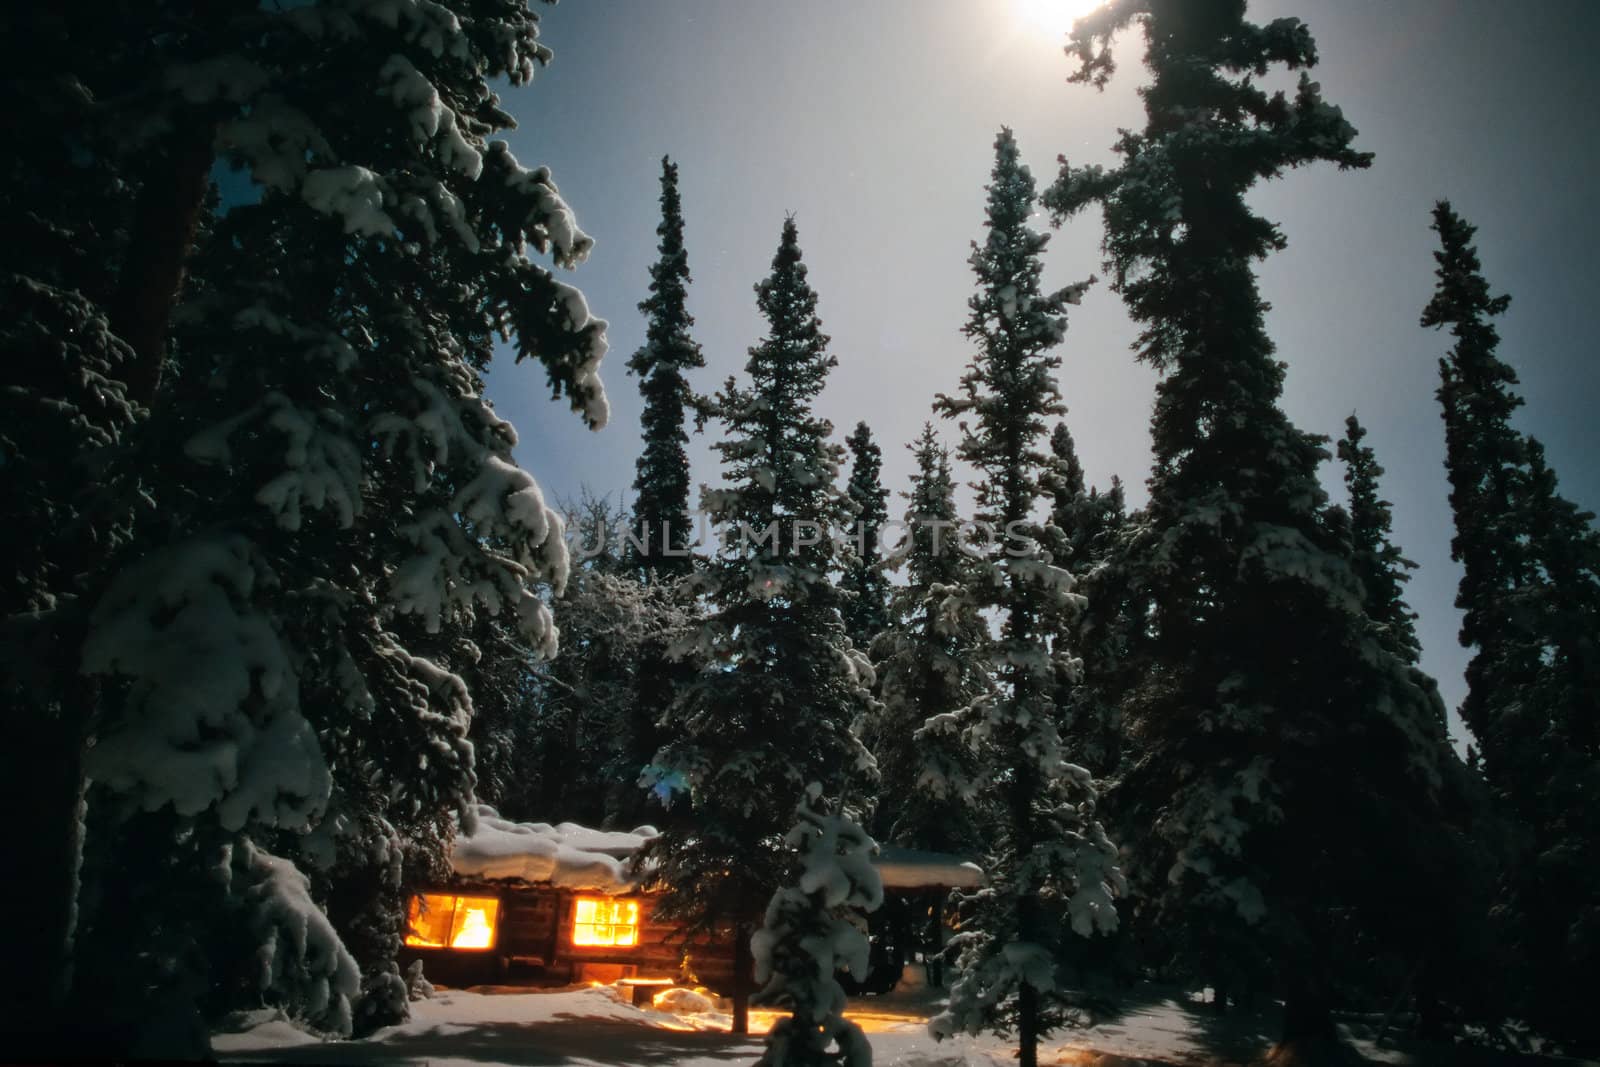 Cozy log cabin at moon-lit winter night by PiLens